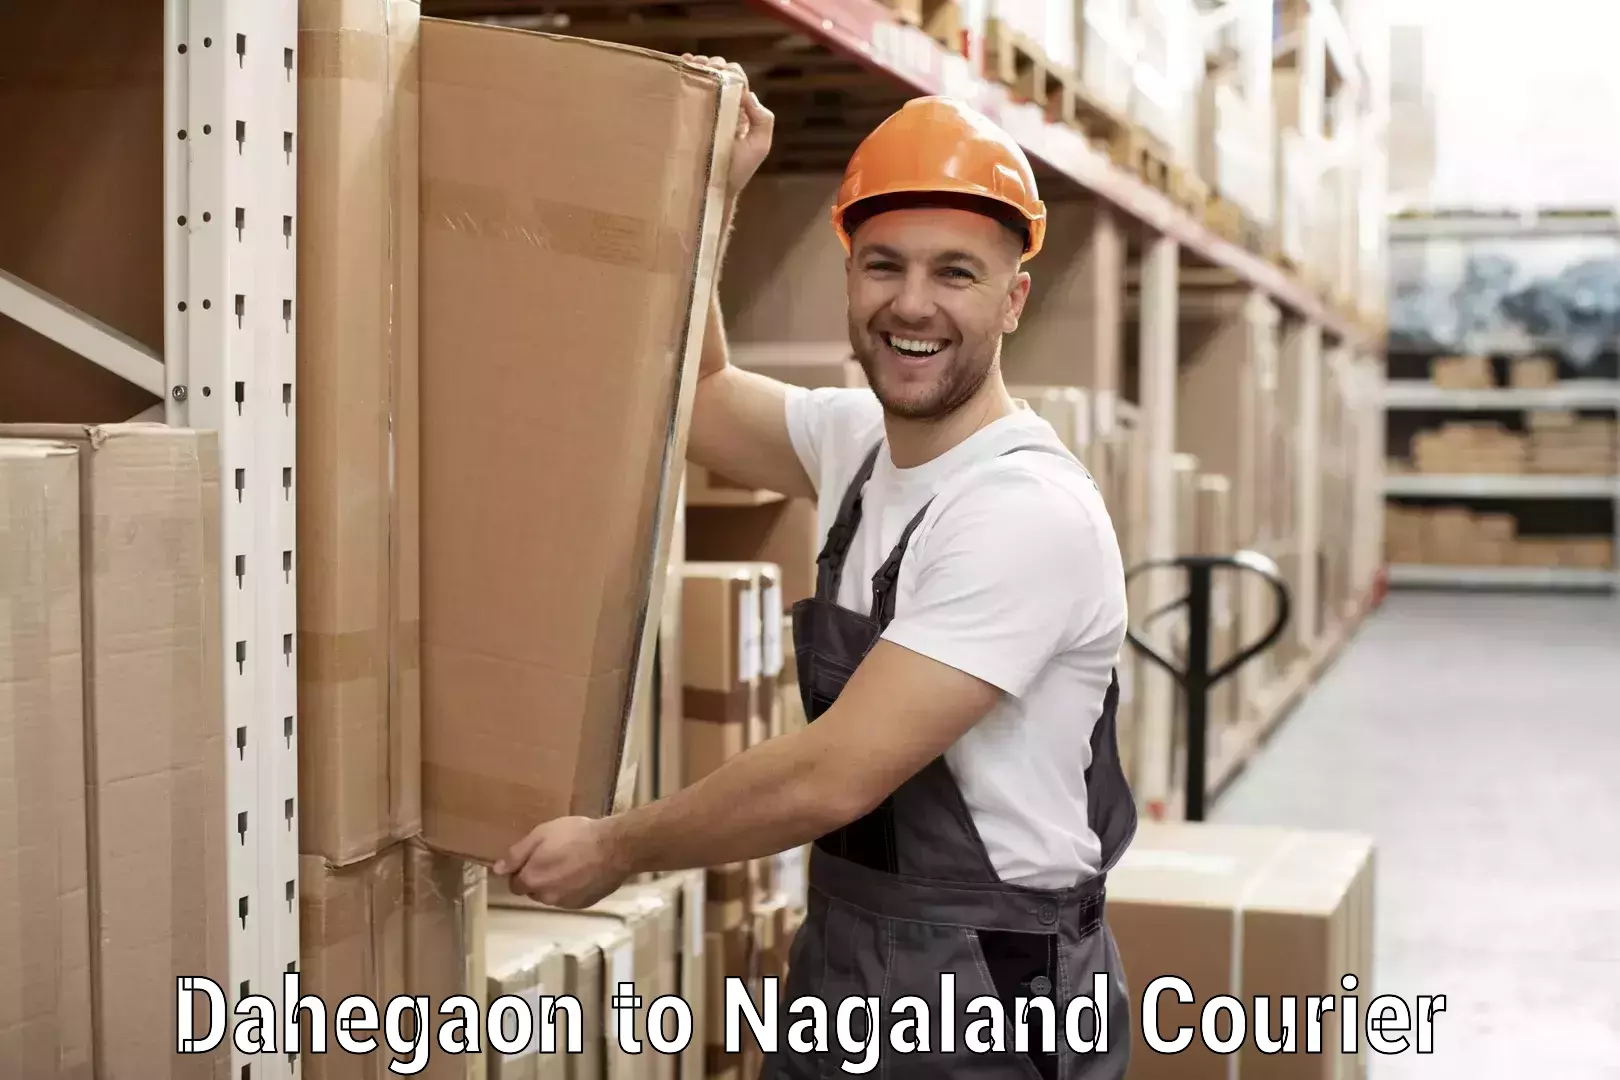 Local delivery service Dahegaon to Nagaland